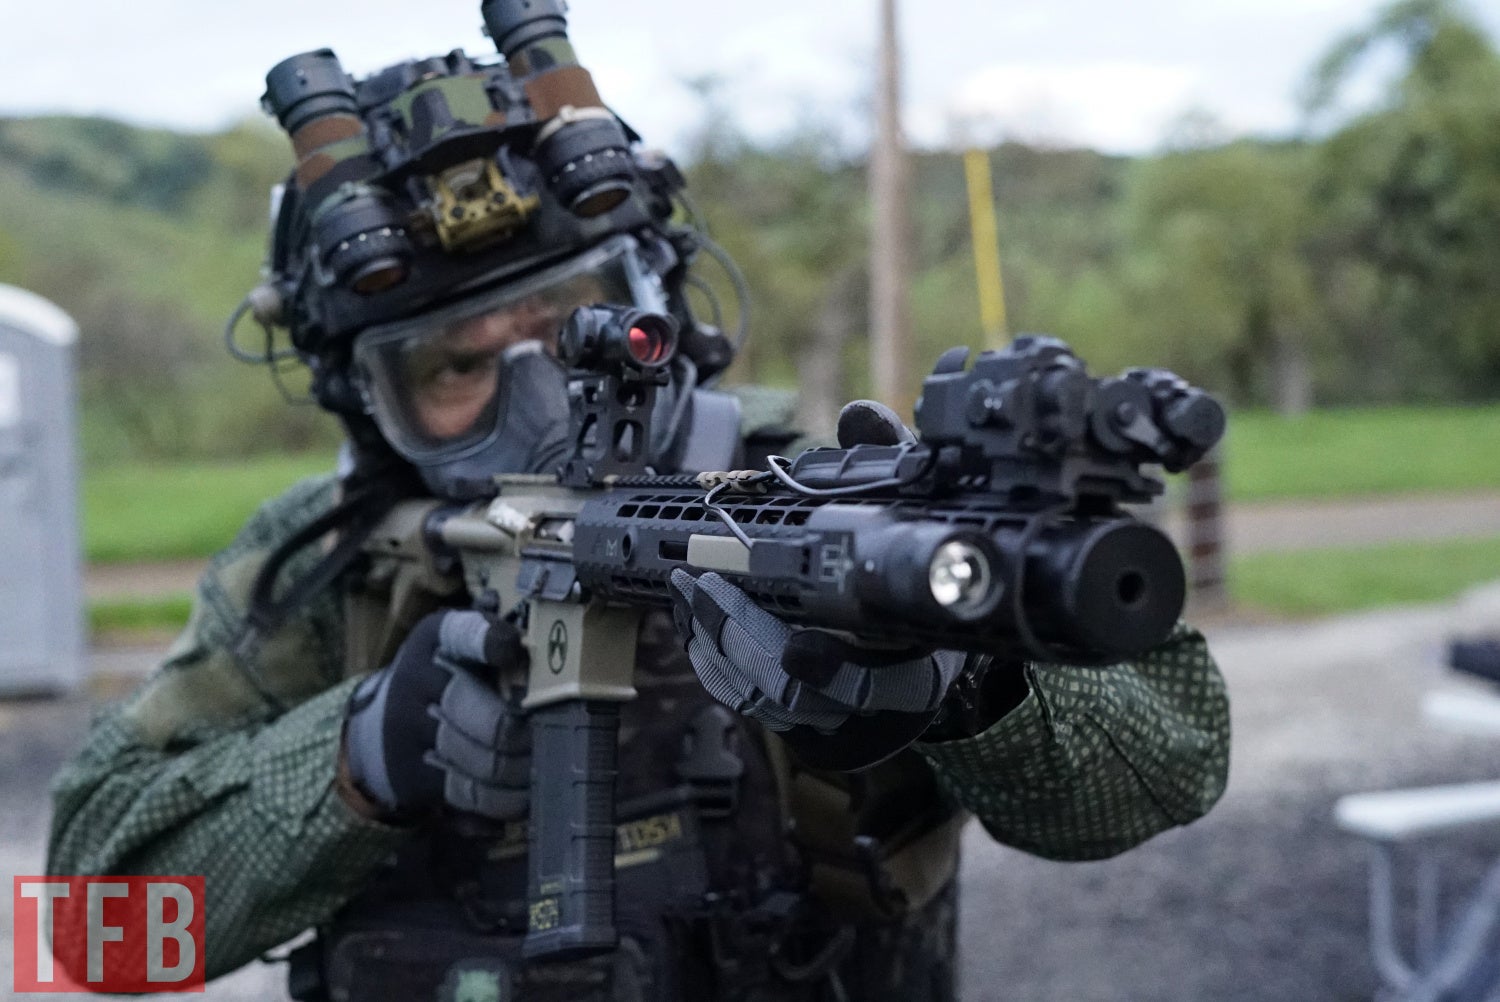 SIG Sauer Folding Visor Stock: How To Shoulder A Rifle With COVID-19 Panic Masks -The Blog